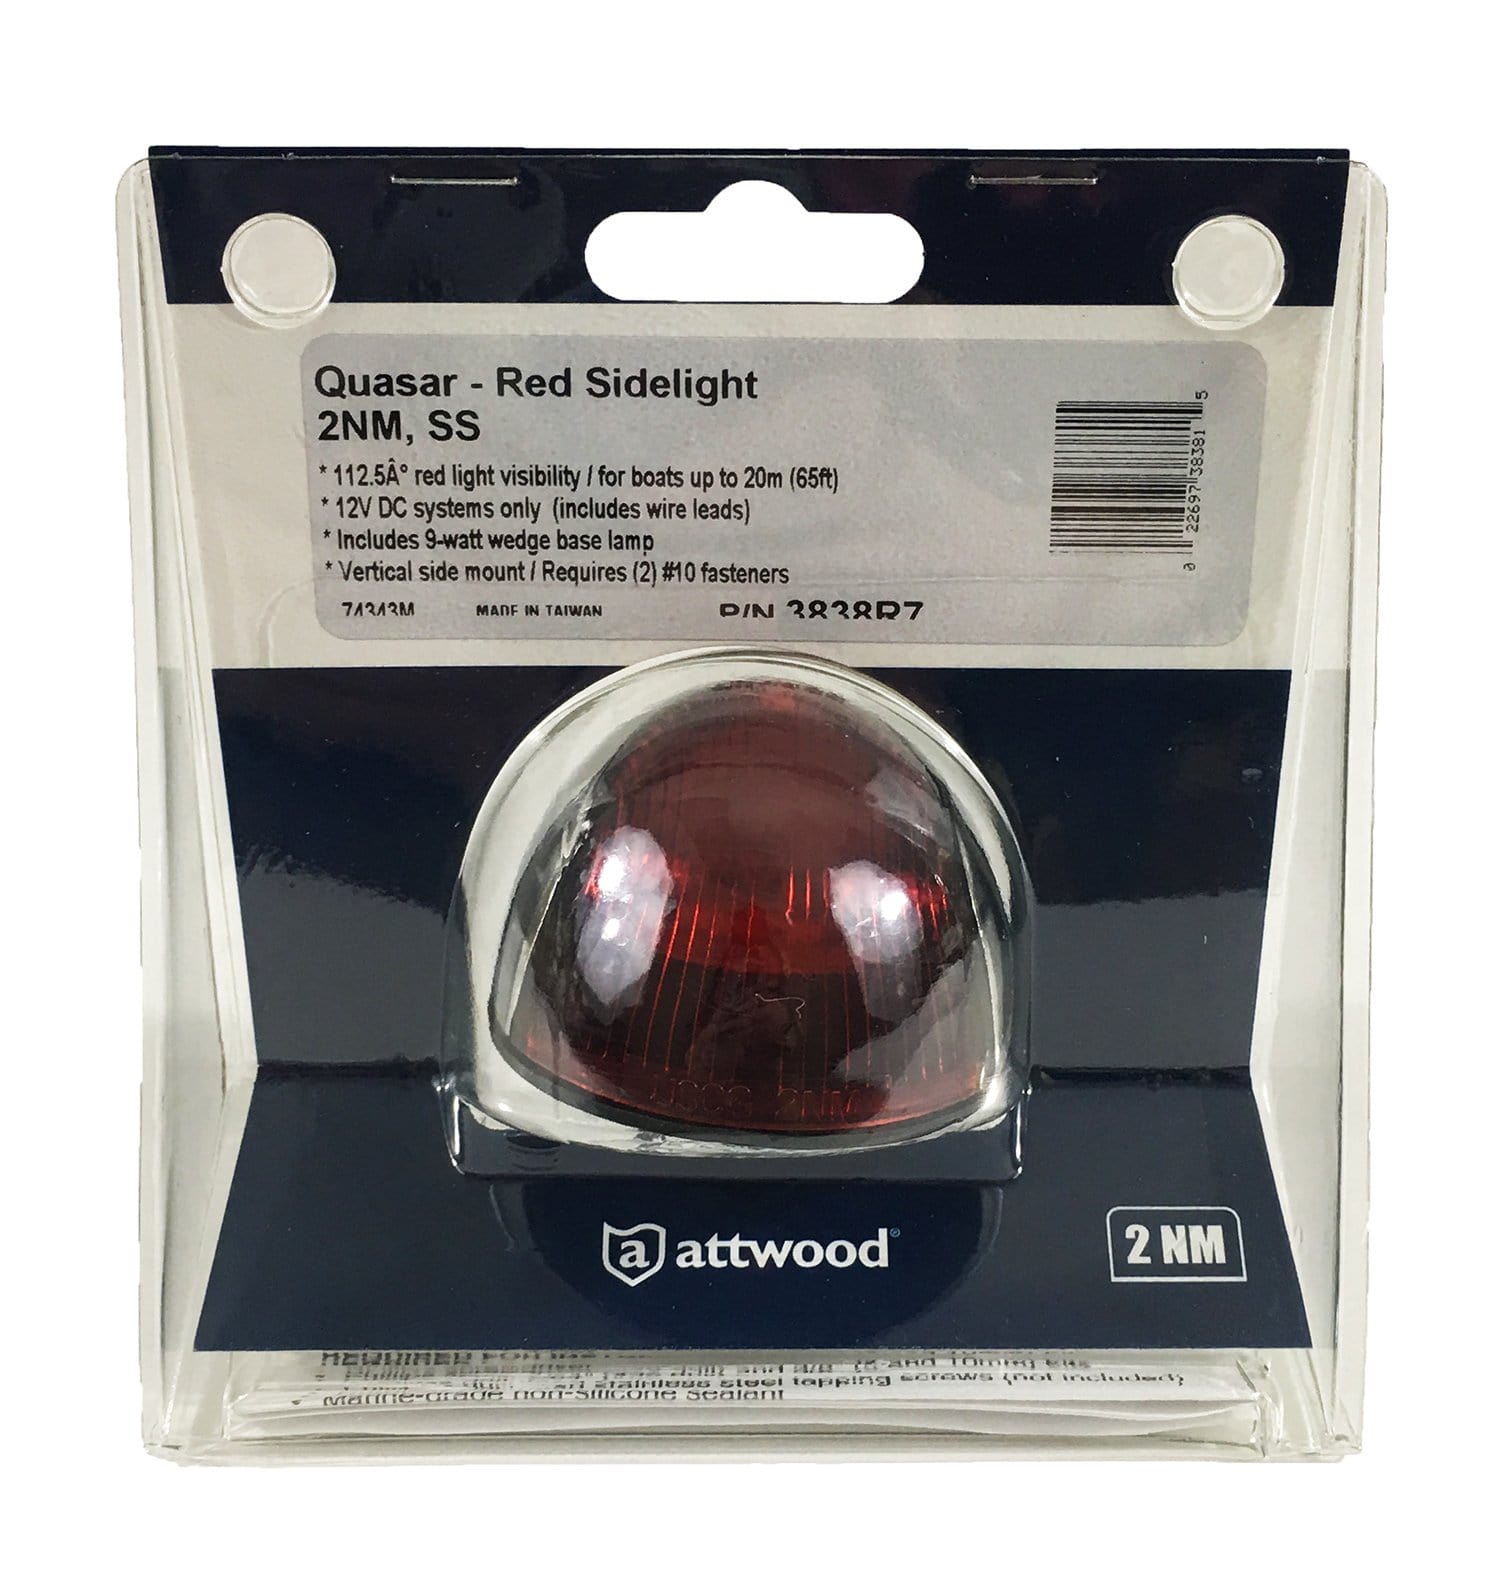 Attwood 3838R7 2-Mile Vertical Mount Sidelight, Red